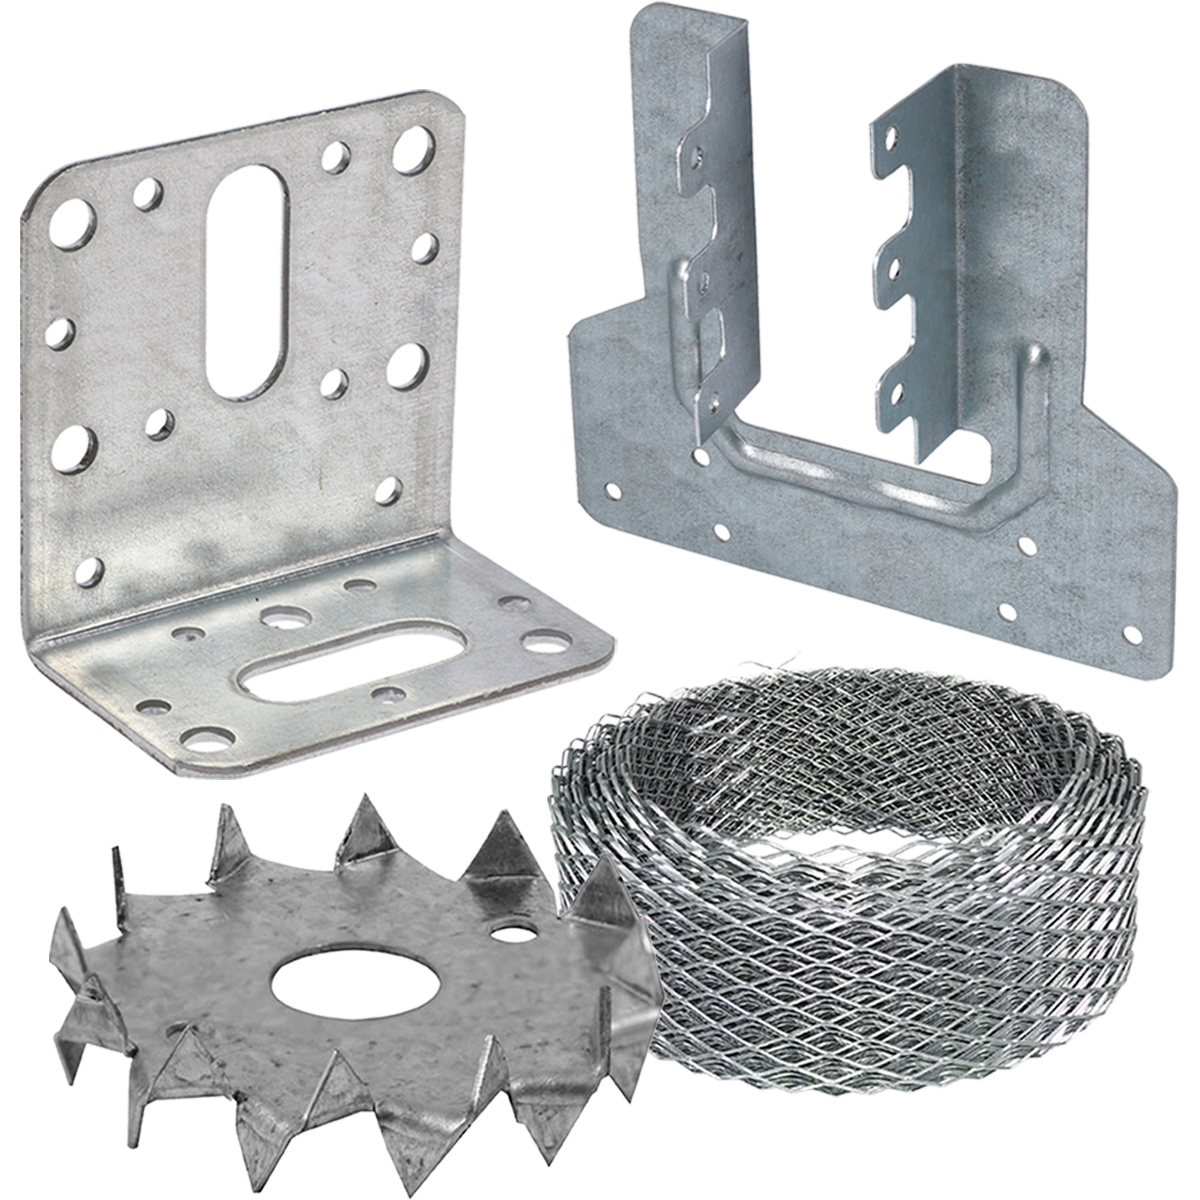 Structural Fixings including angle brackets, brick reinforcing coil, masonry joist hangers and muti-functional hangers.